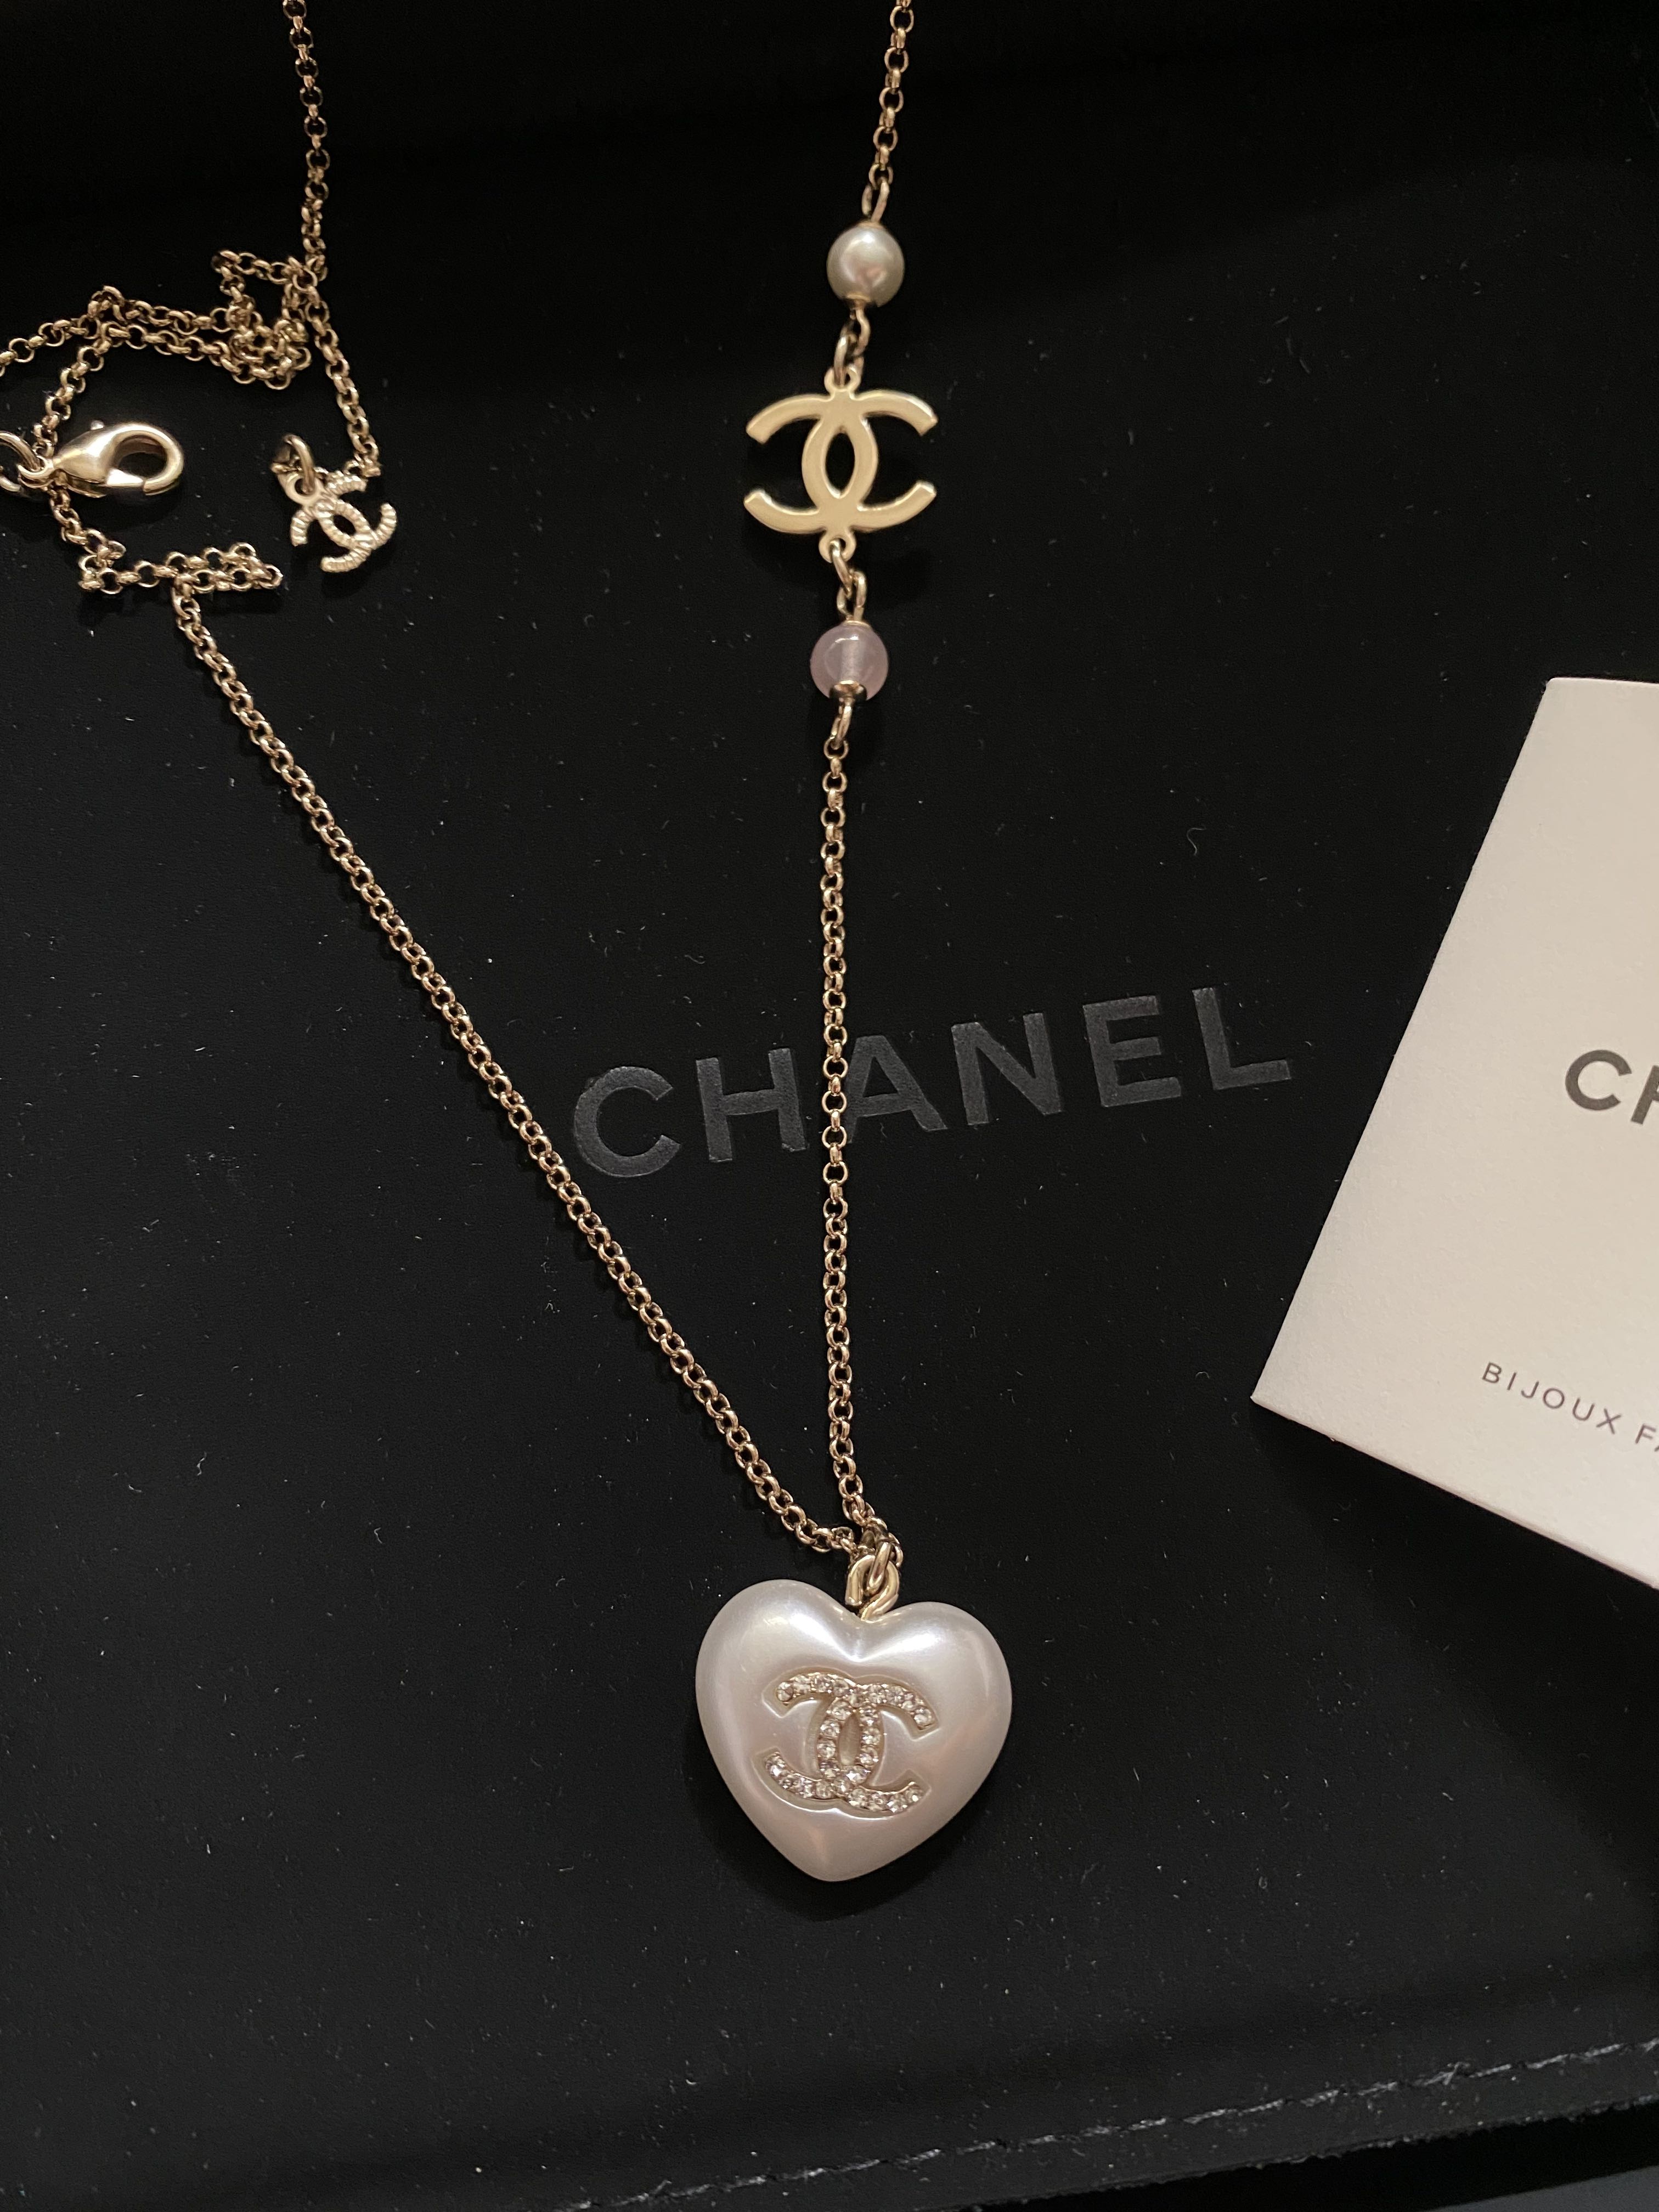 Chanel 21B Heart Pearl Pink Crystal CC Necklace, Women's Fashion